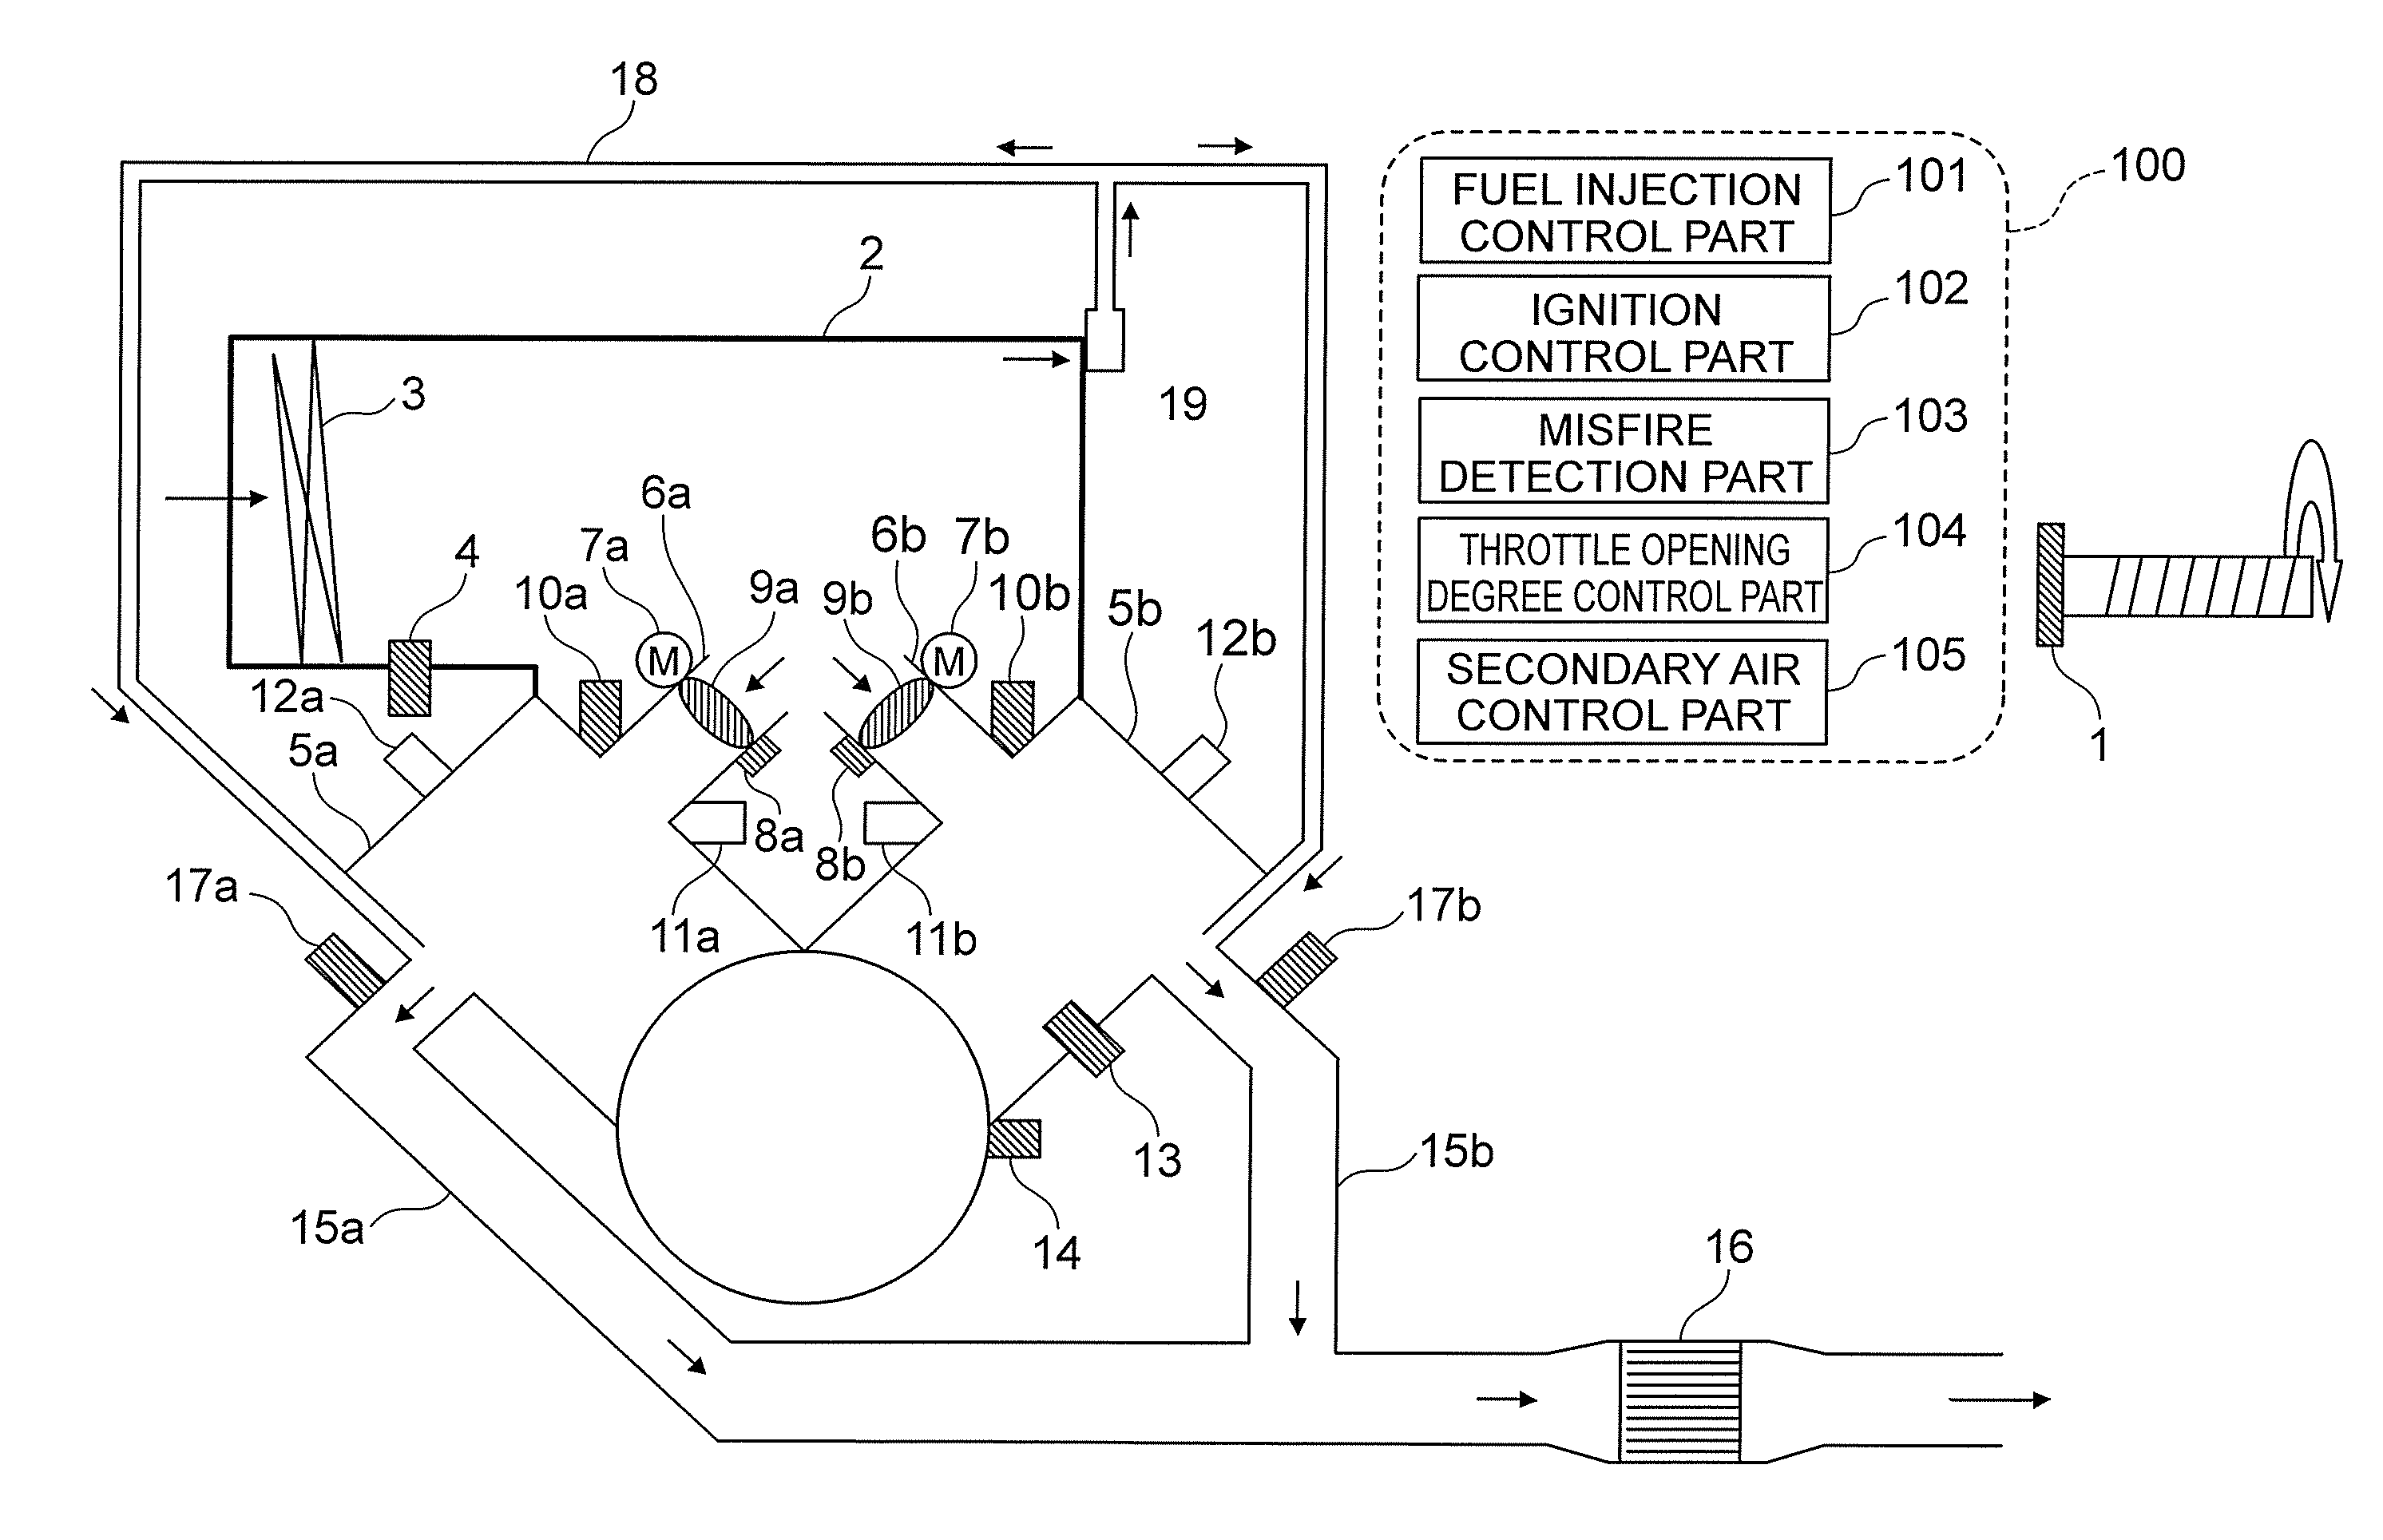 Misfire detection apparatus and misfire detection method for an internal combustion engine